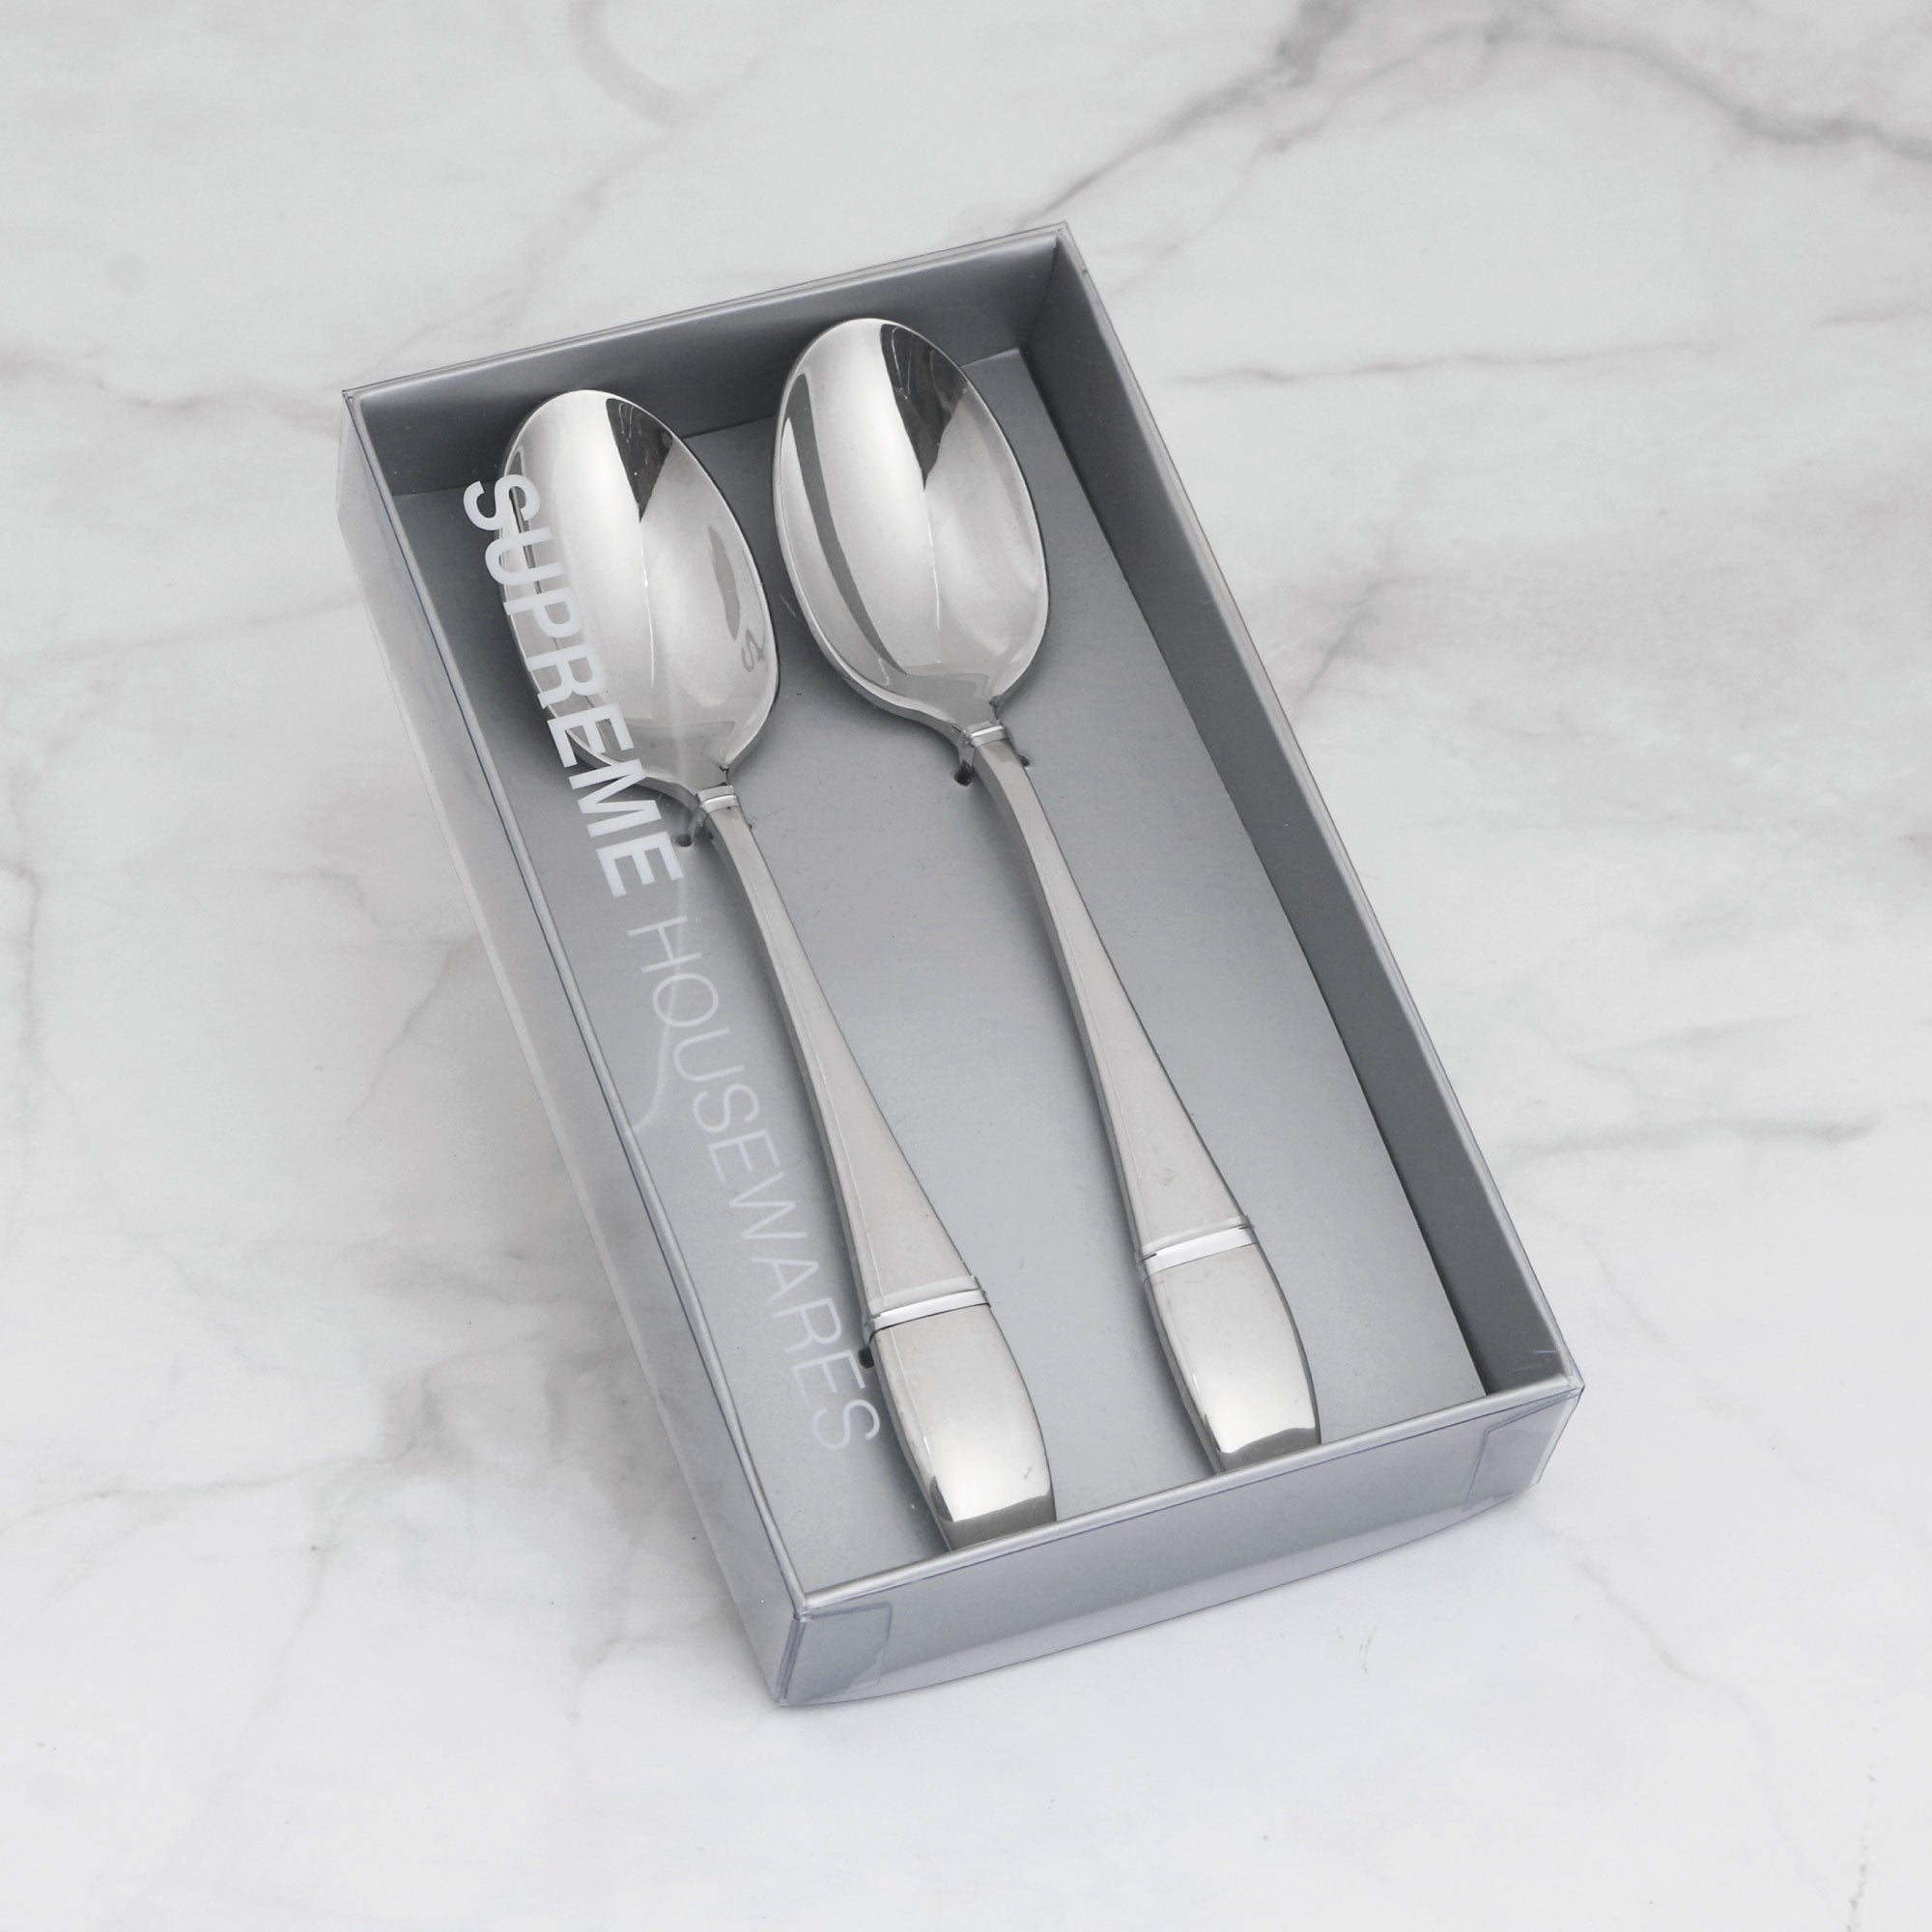 Tea Spoon Quality Coffee Spoon Stainless Steel Square Head Table